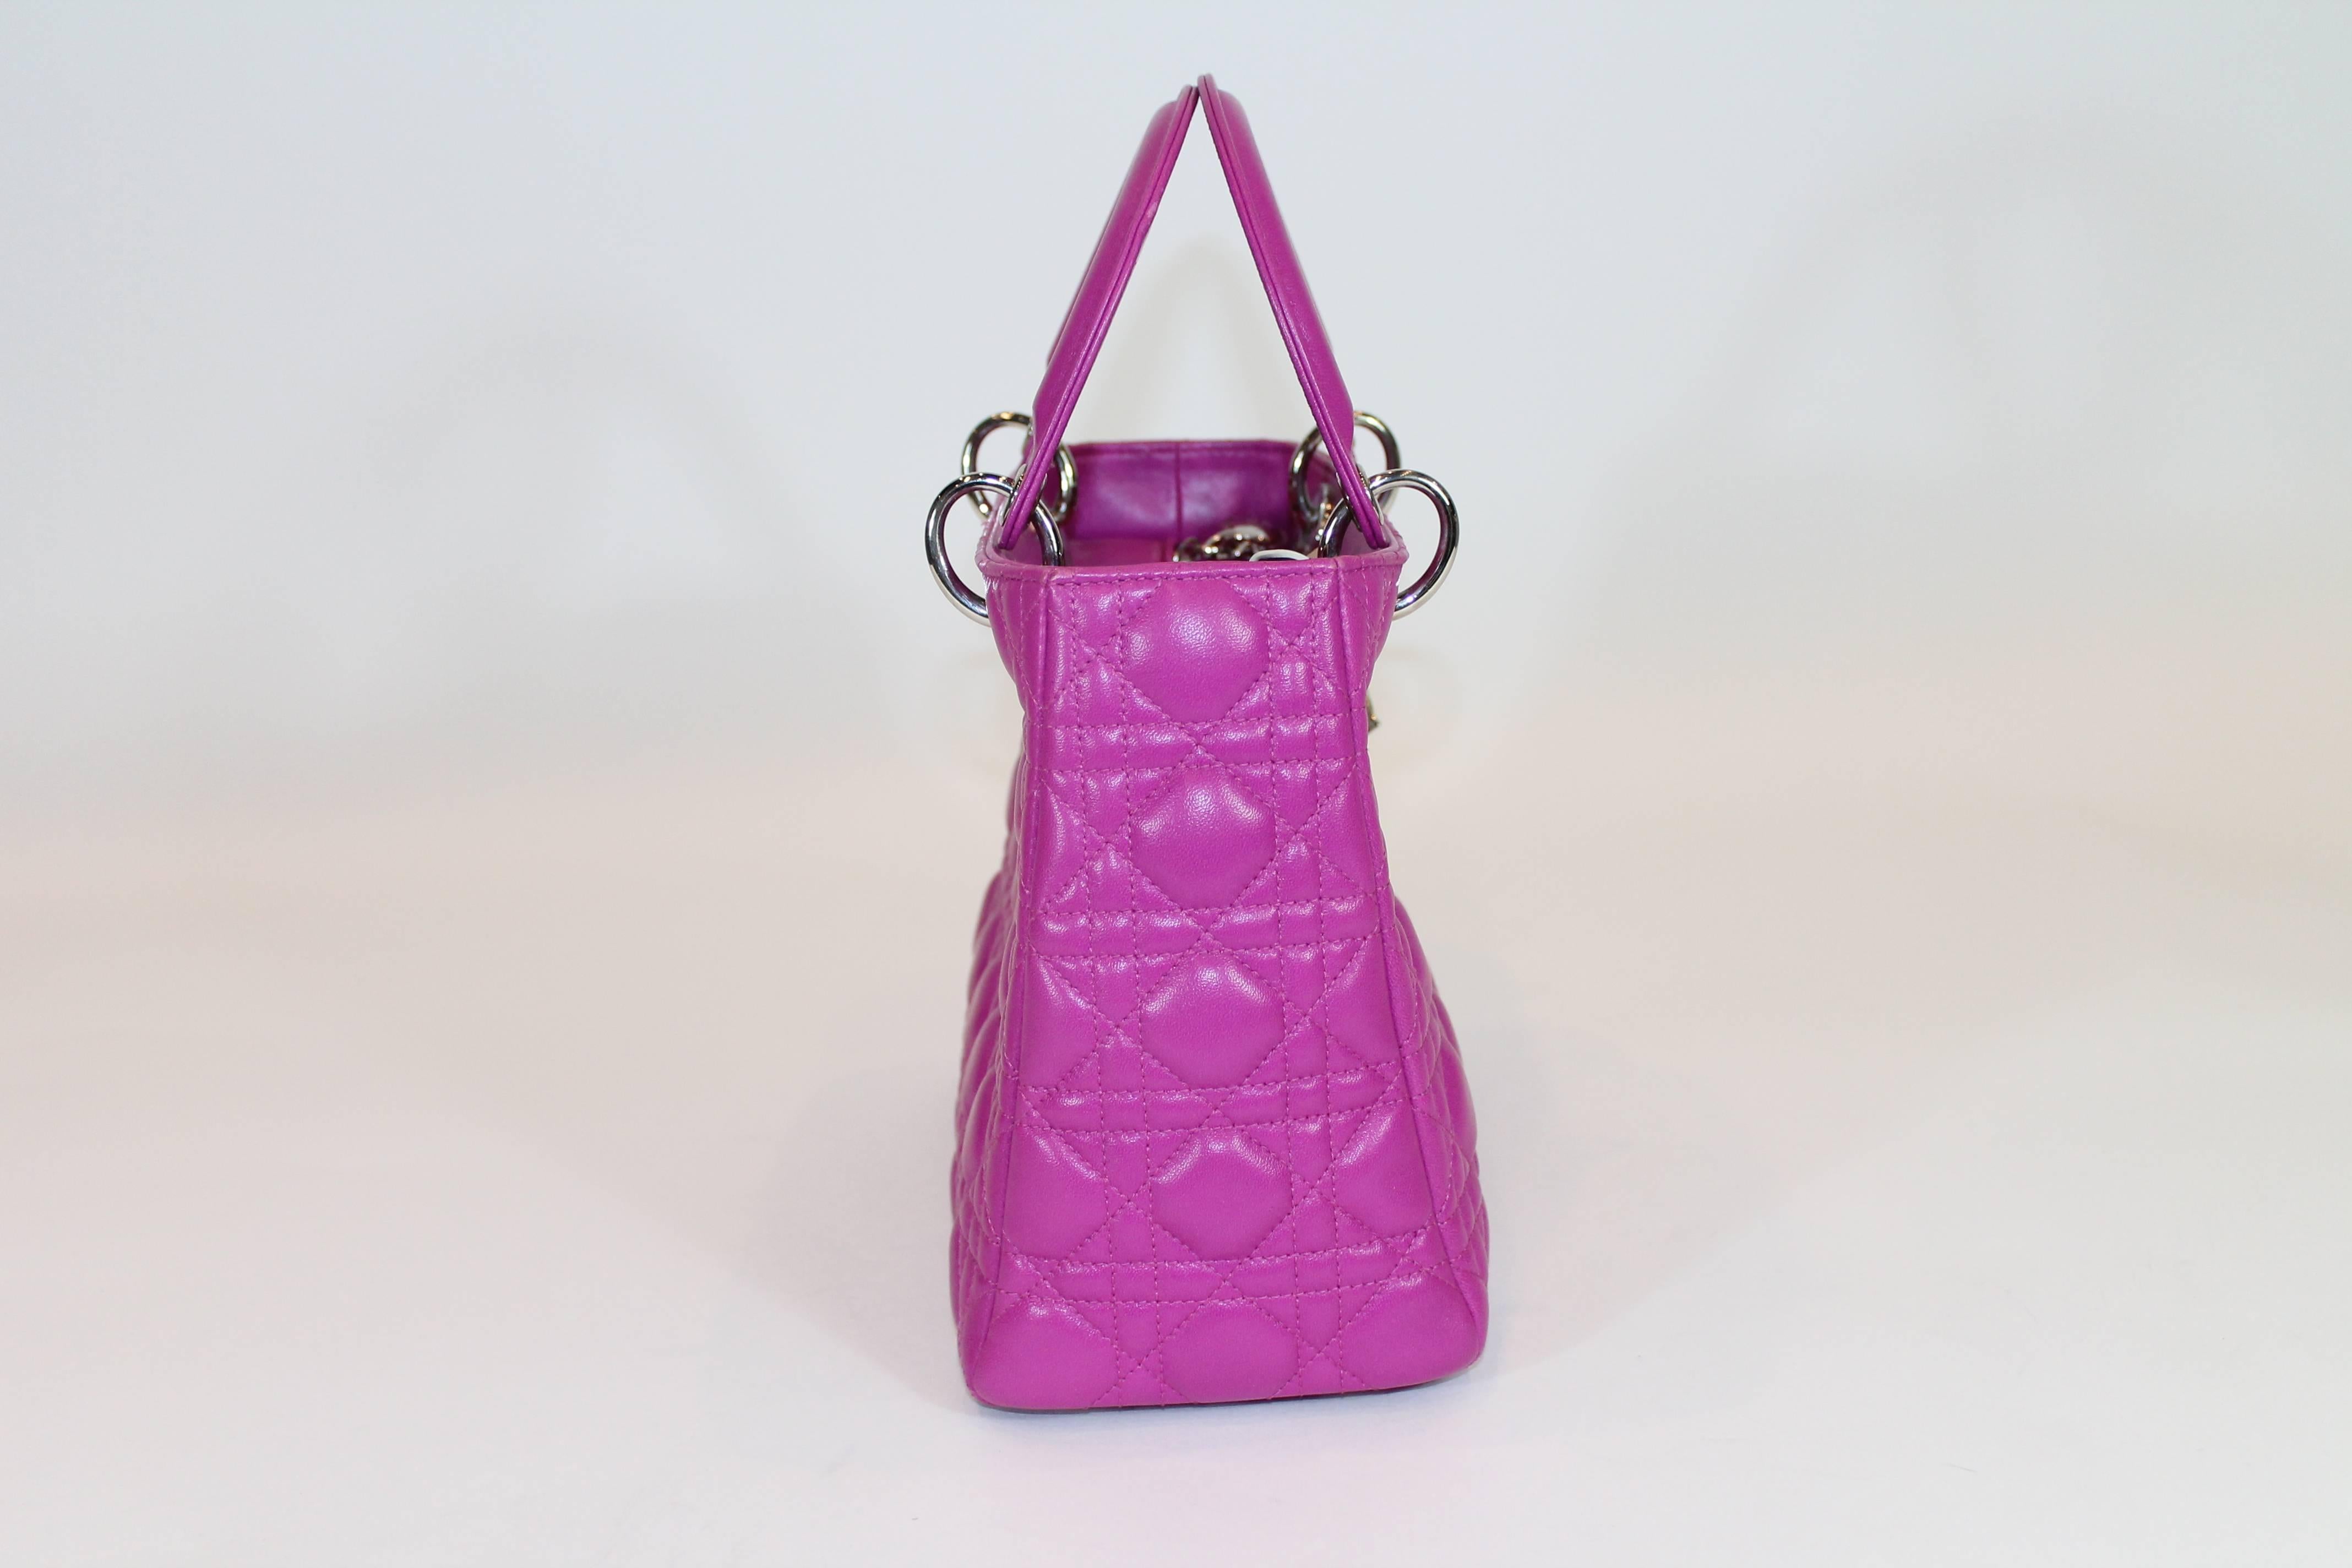 Fuchsia Cannage leather. Silver-tone hardware. Dual flat top handles. Featuring logo charm accents. Protective feet at base, Zip closure at top. One interior zippered pocket. Detachable shoulder strap.